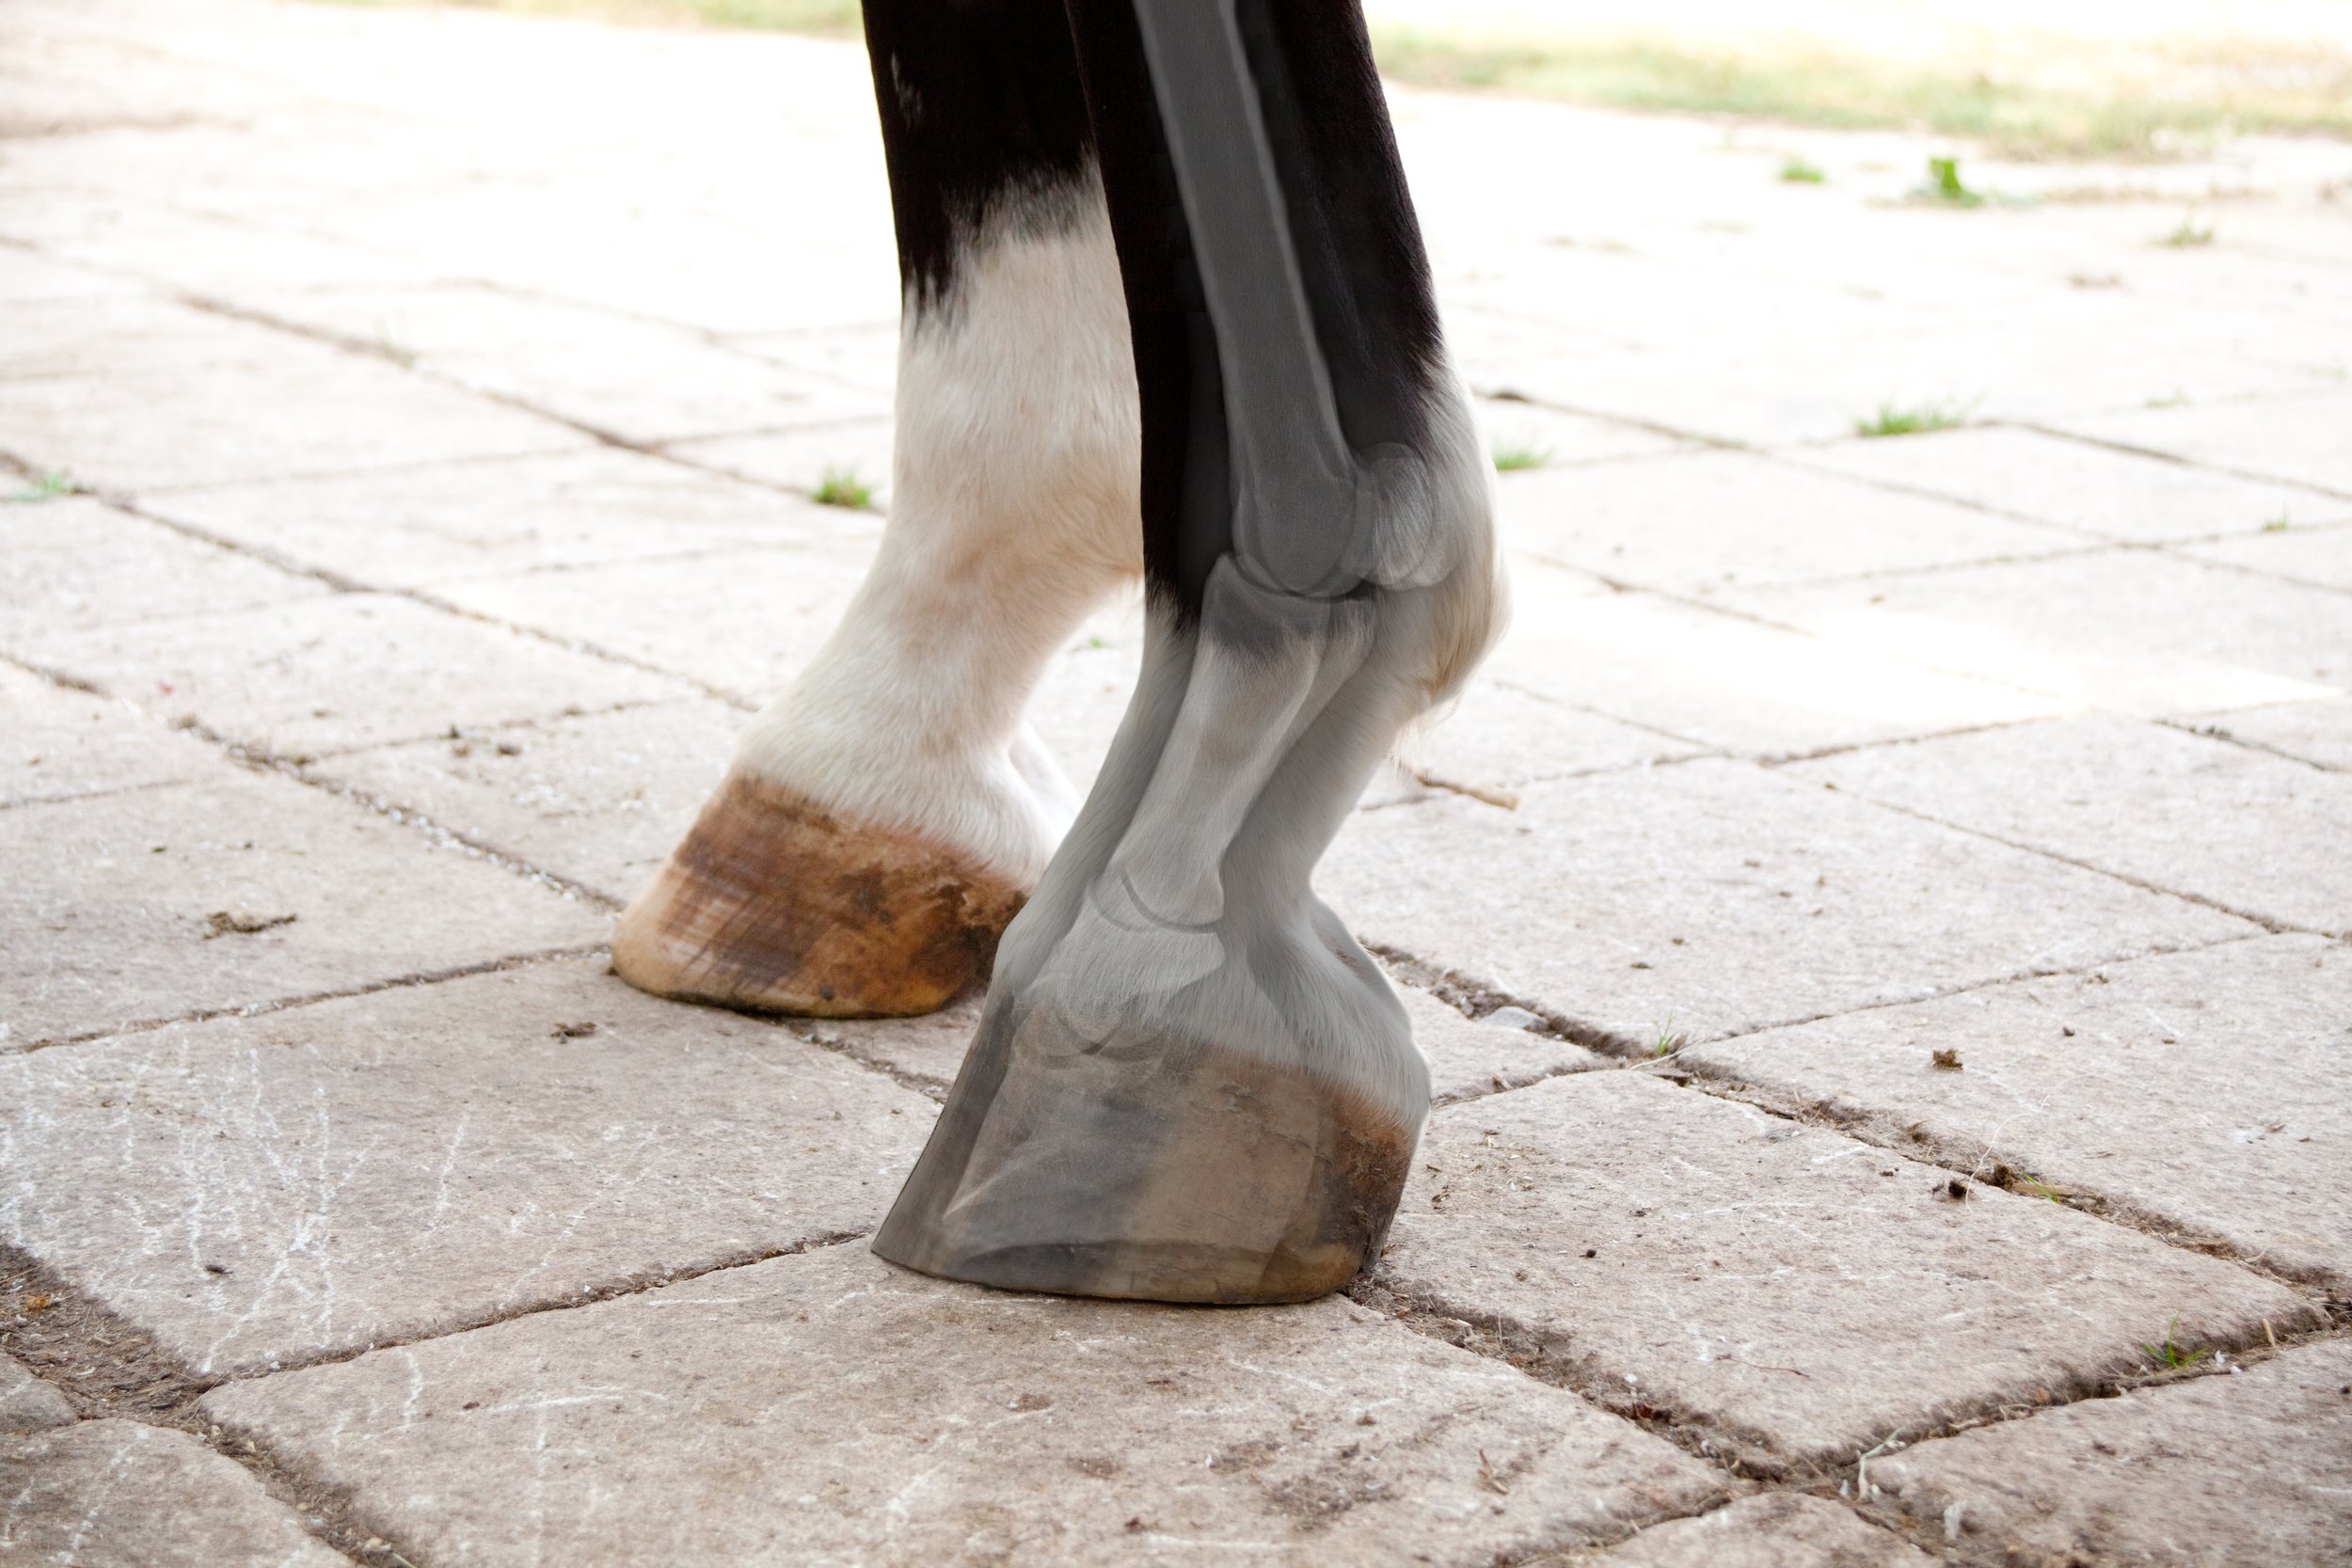 Animals | Free Full-Text | An Investigation into the Effects of Changing  Dorso-Plantar Hoof Balance on Equine Hind Limb Posture